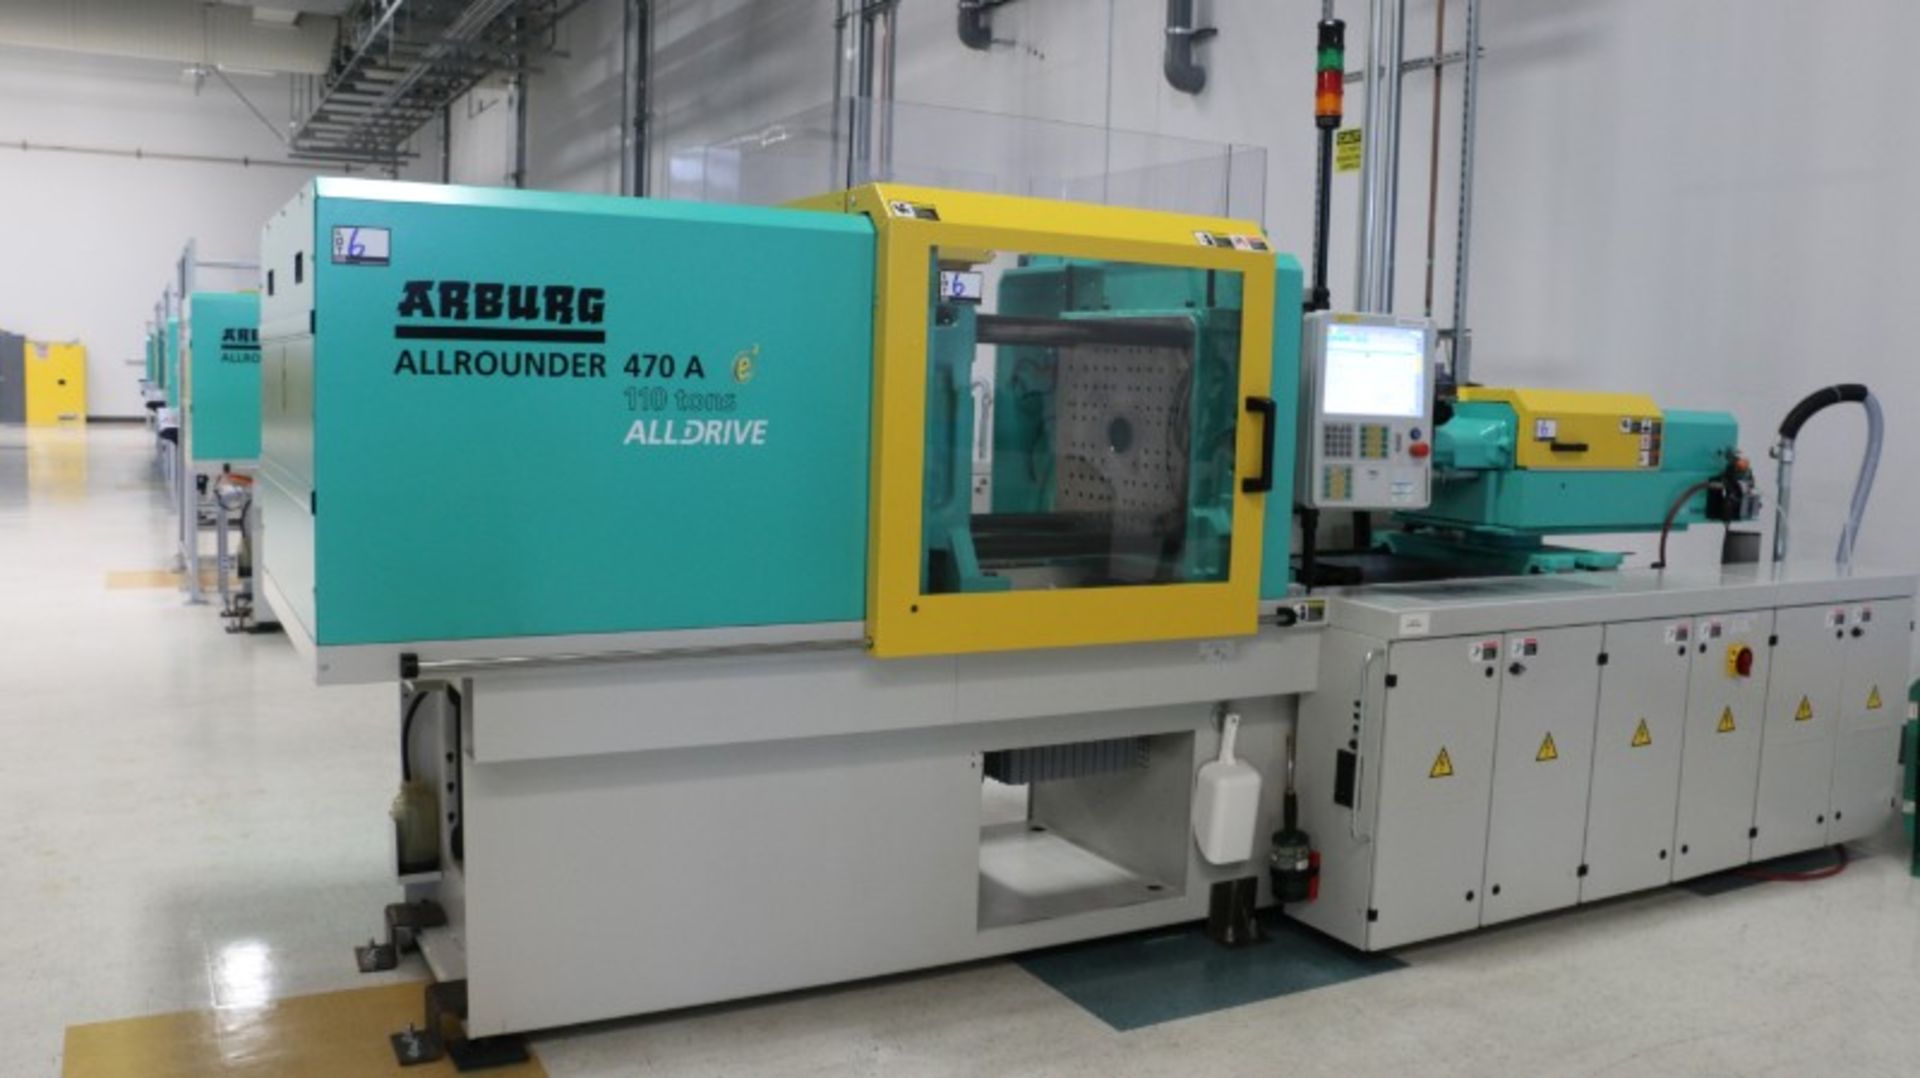 Arburg Model 470 A 1000-290 110-Ton x 2.38-Oz. Electric Injection Molding Machine - Image 3 of 12